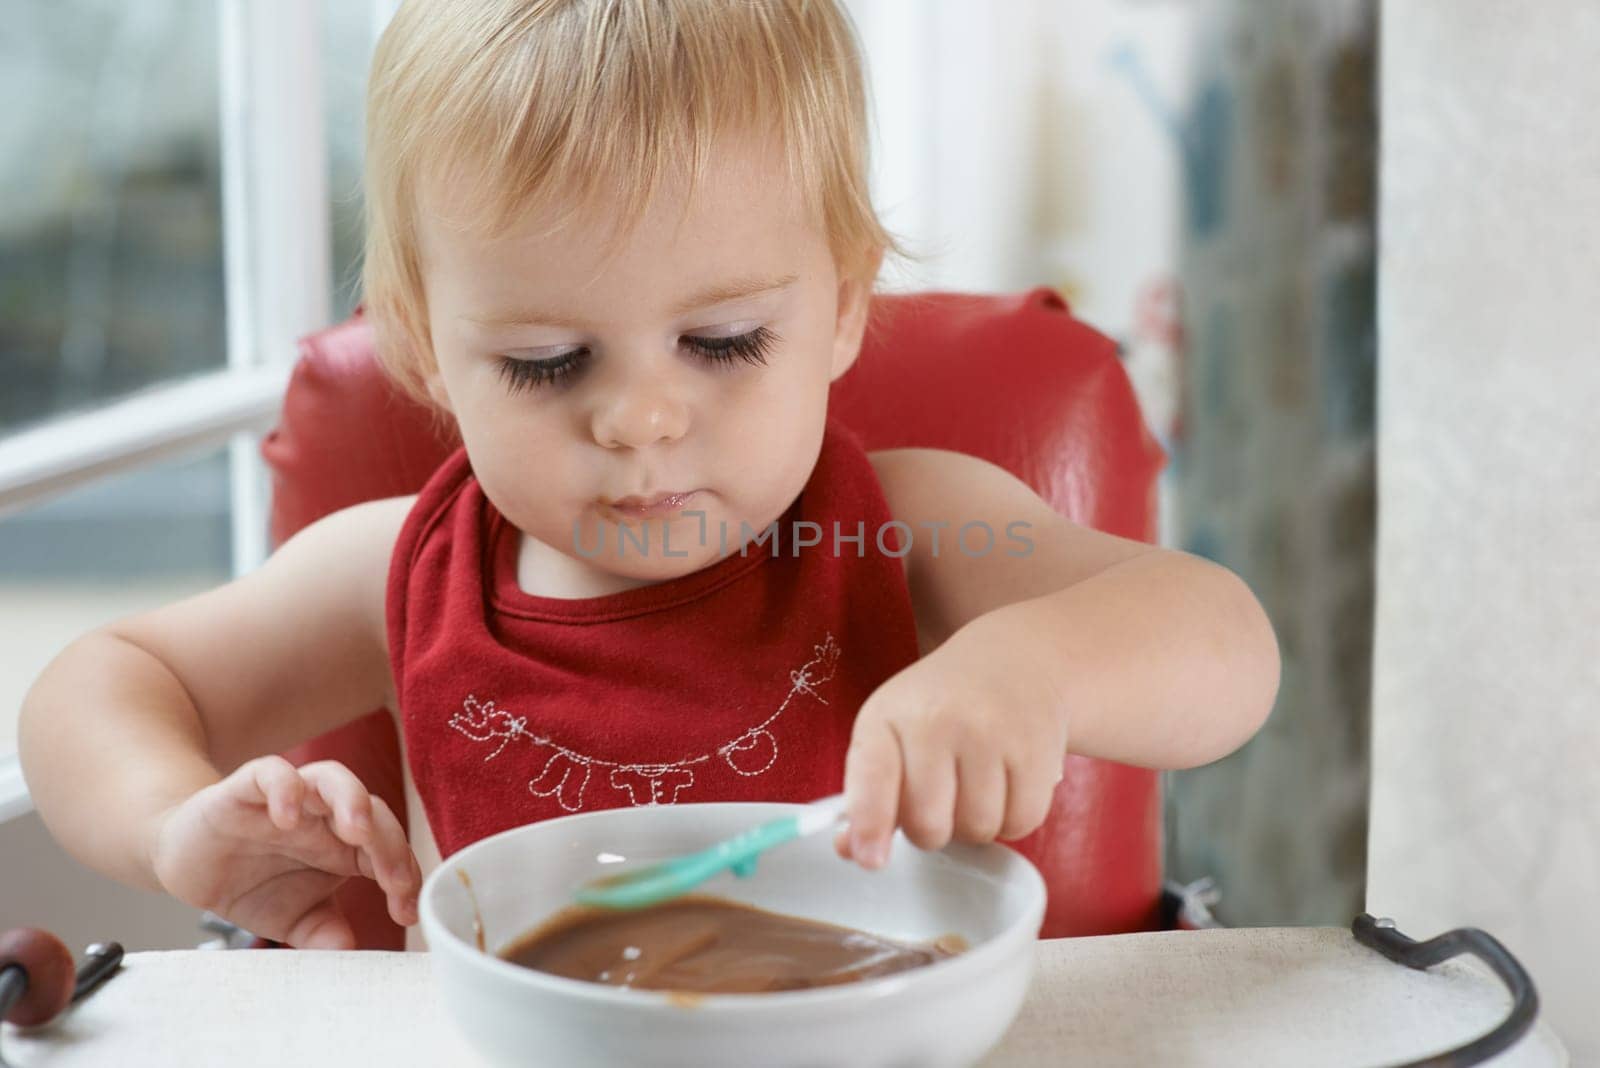 Hungry, sweet and baby eating porridge for health, nutrition or child development at home. Food, cute and girl toddler or kid enjoying an organic puree meal for lunch or dinner in high chair at house by YuriArcurs